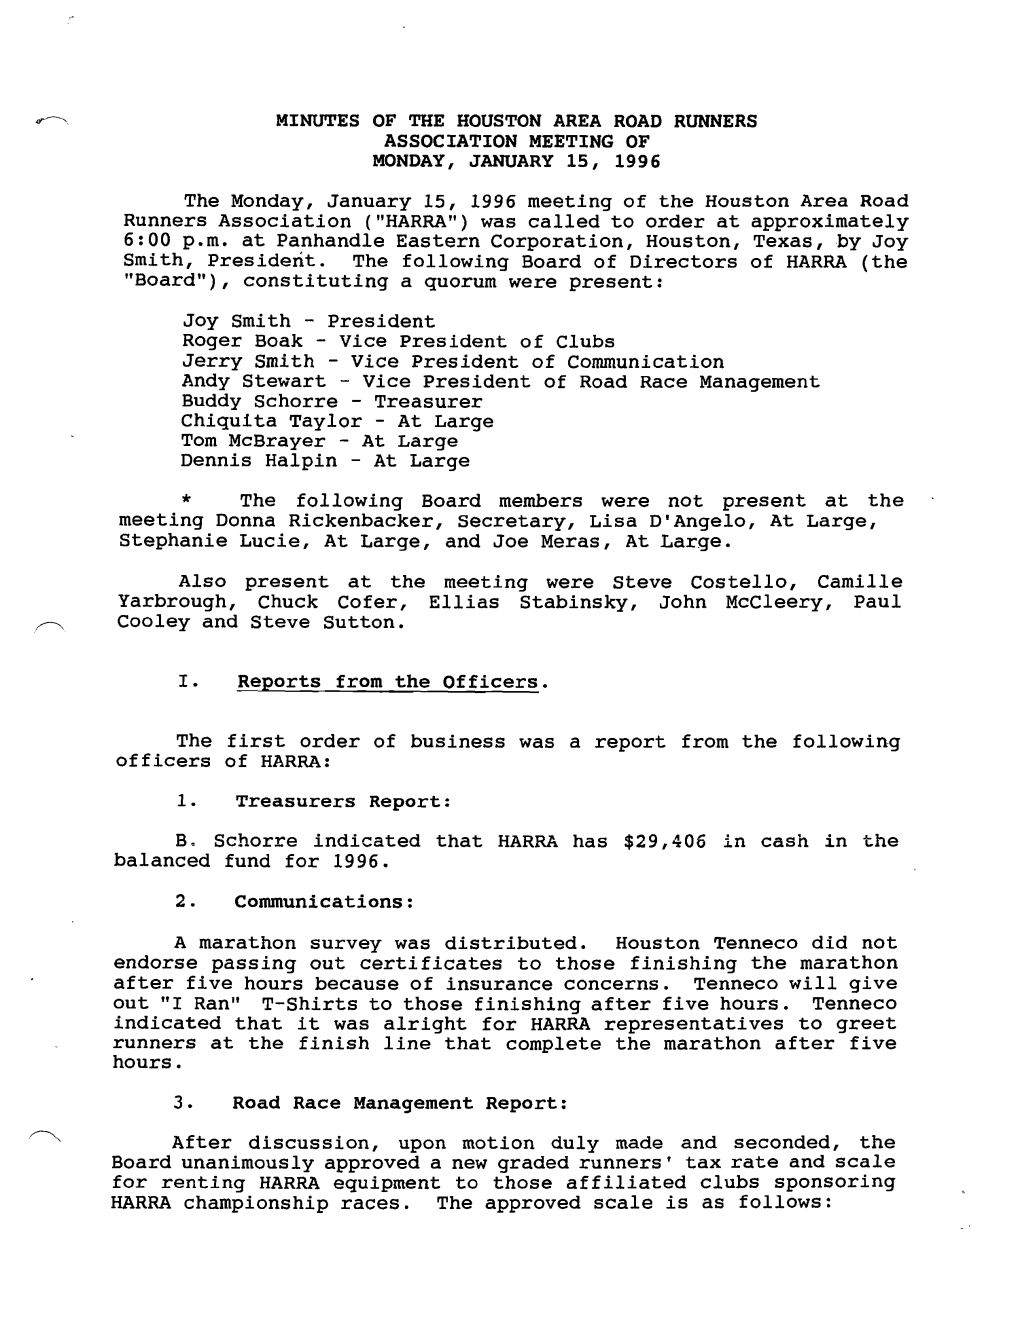 Minutes of the Houston Area Road Runners Association Meeting of Monday, January 15, 1996